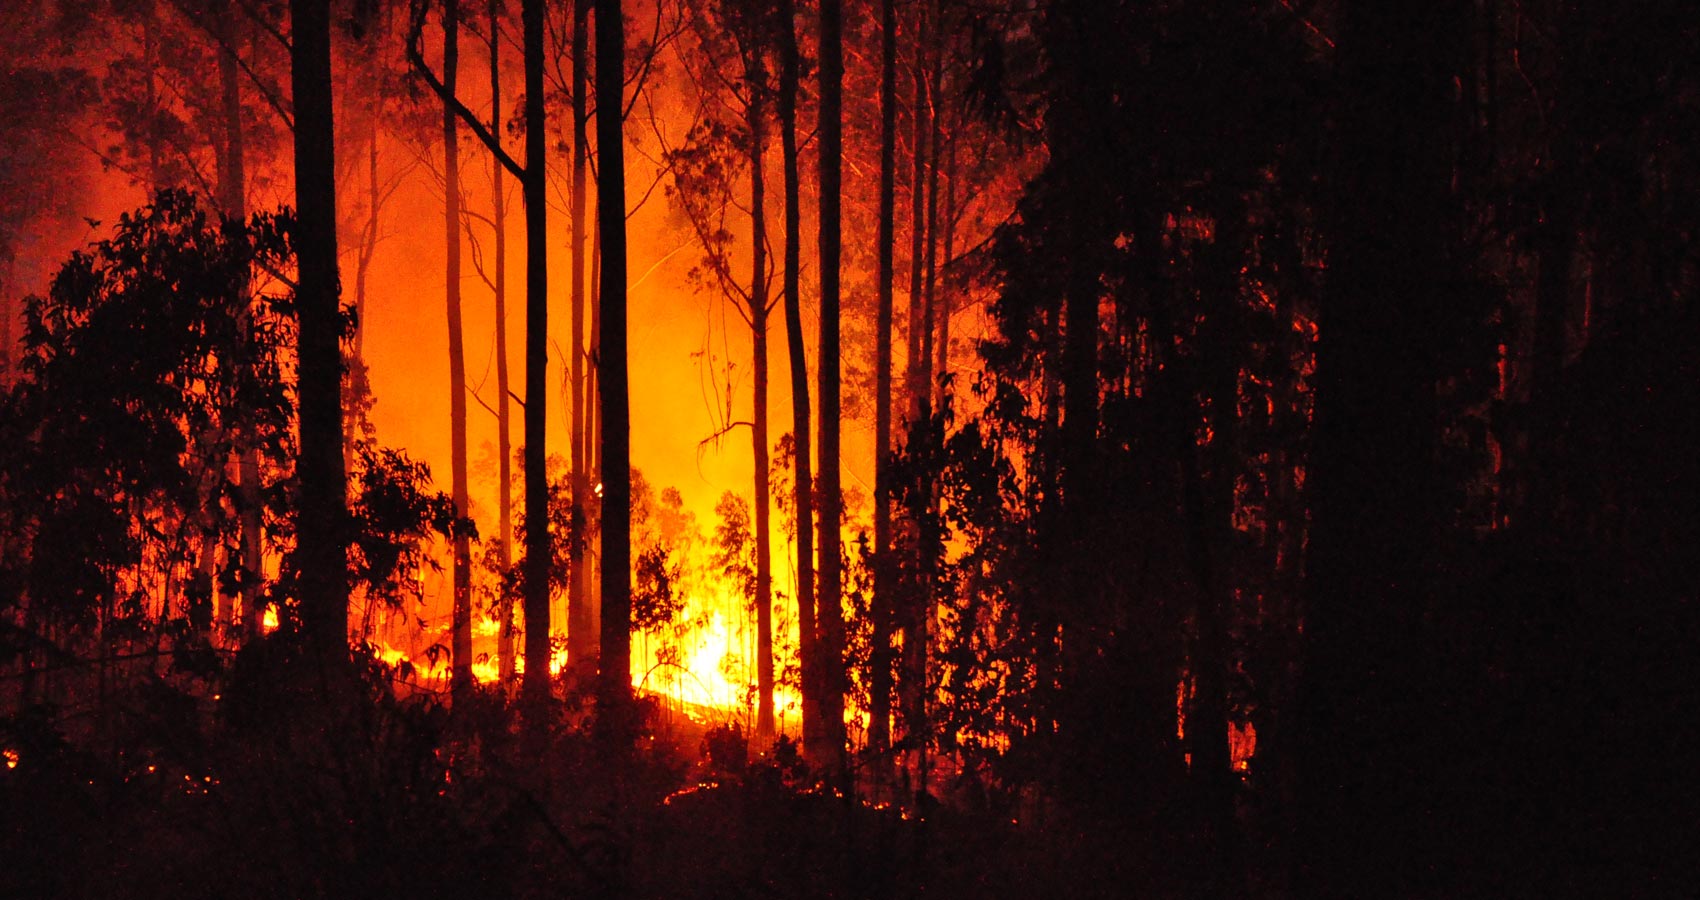 Wildfires, a poem by Shih-Fang Wang at Spillwords.com